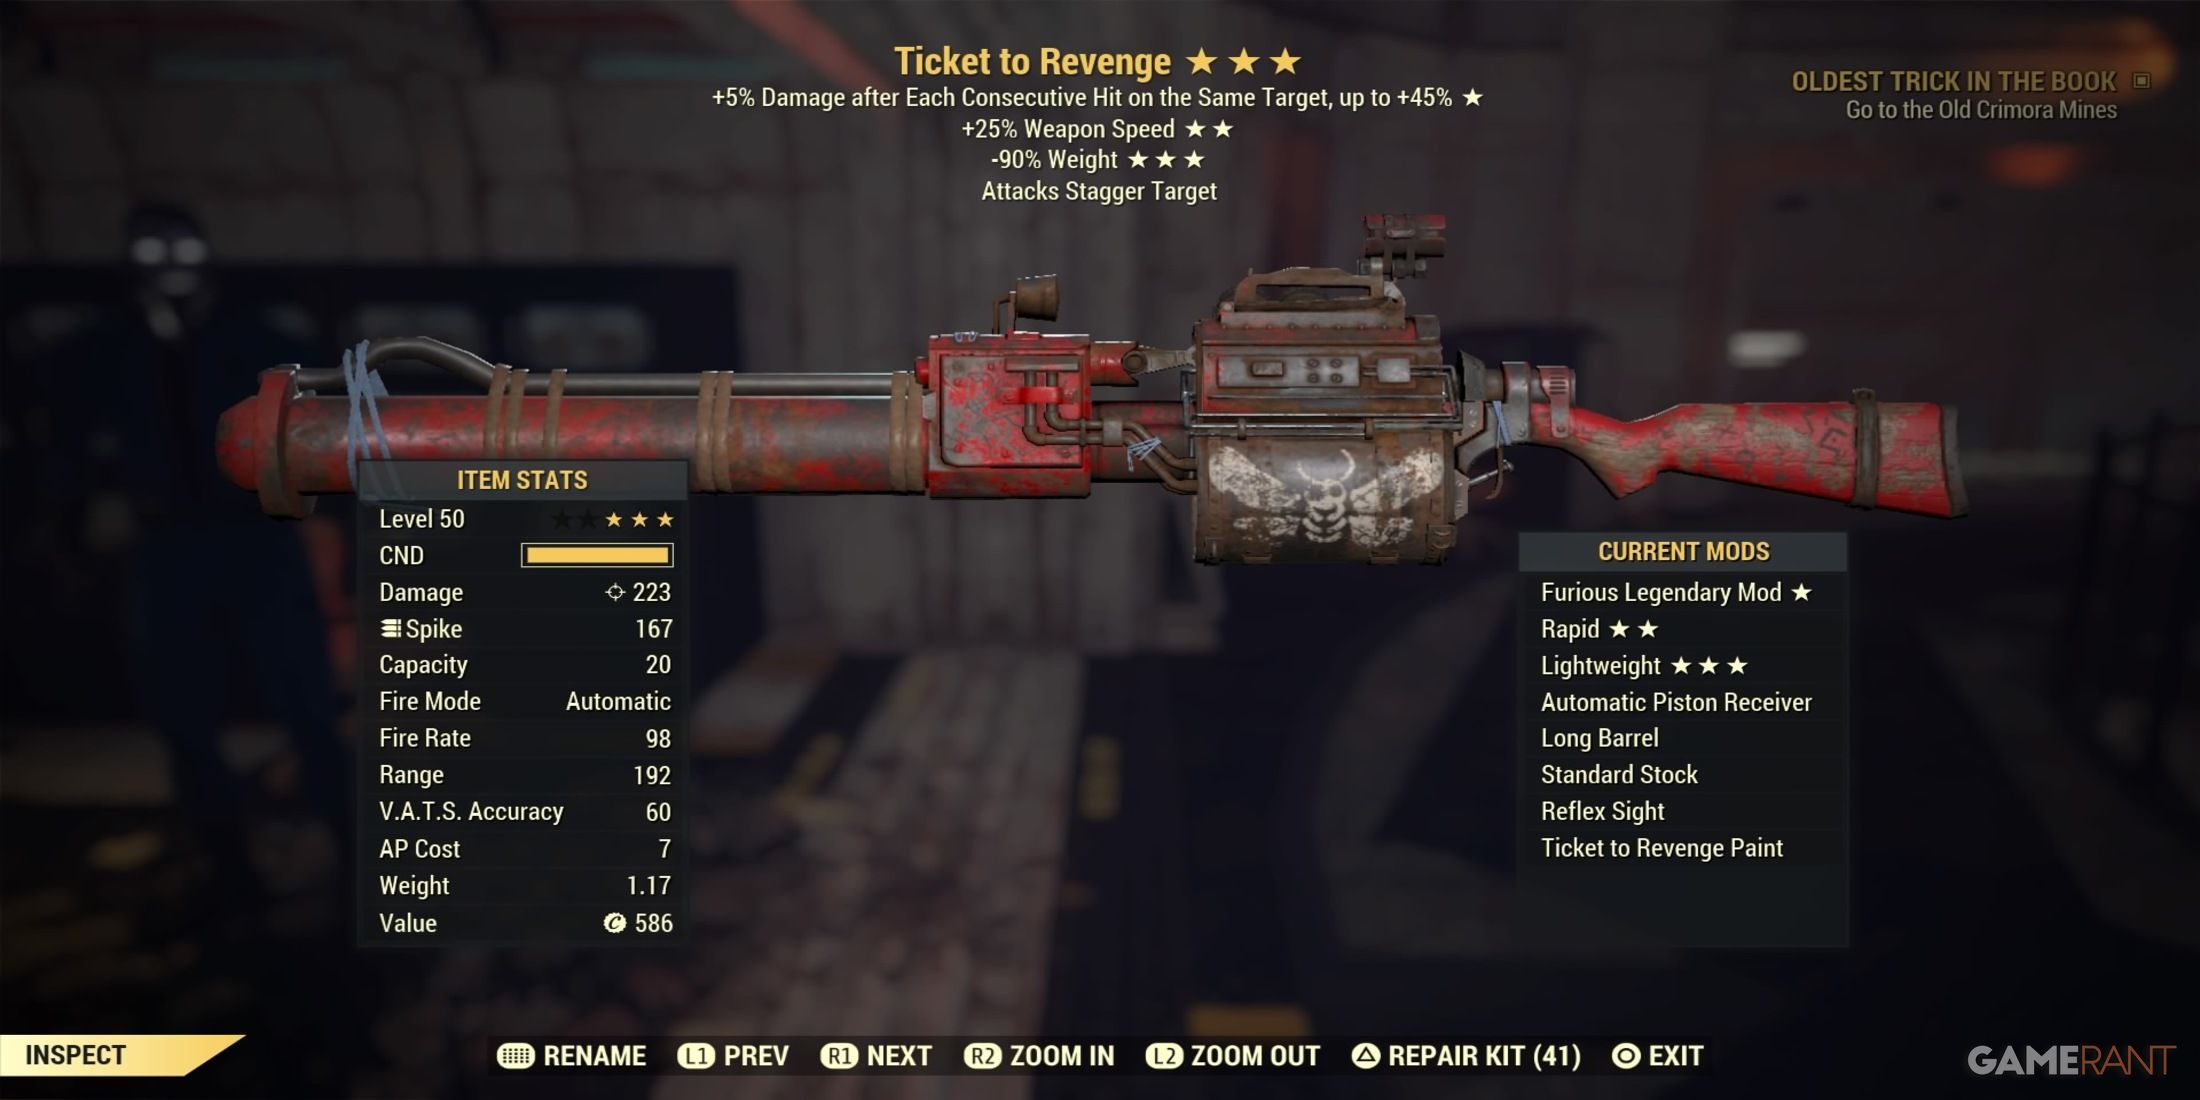 Ticket To Revenge in Fallout 76